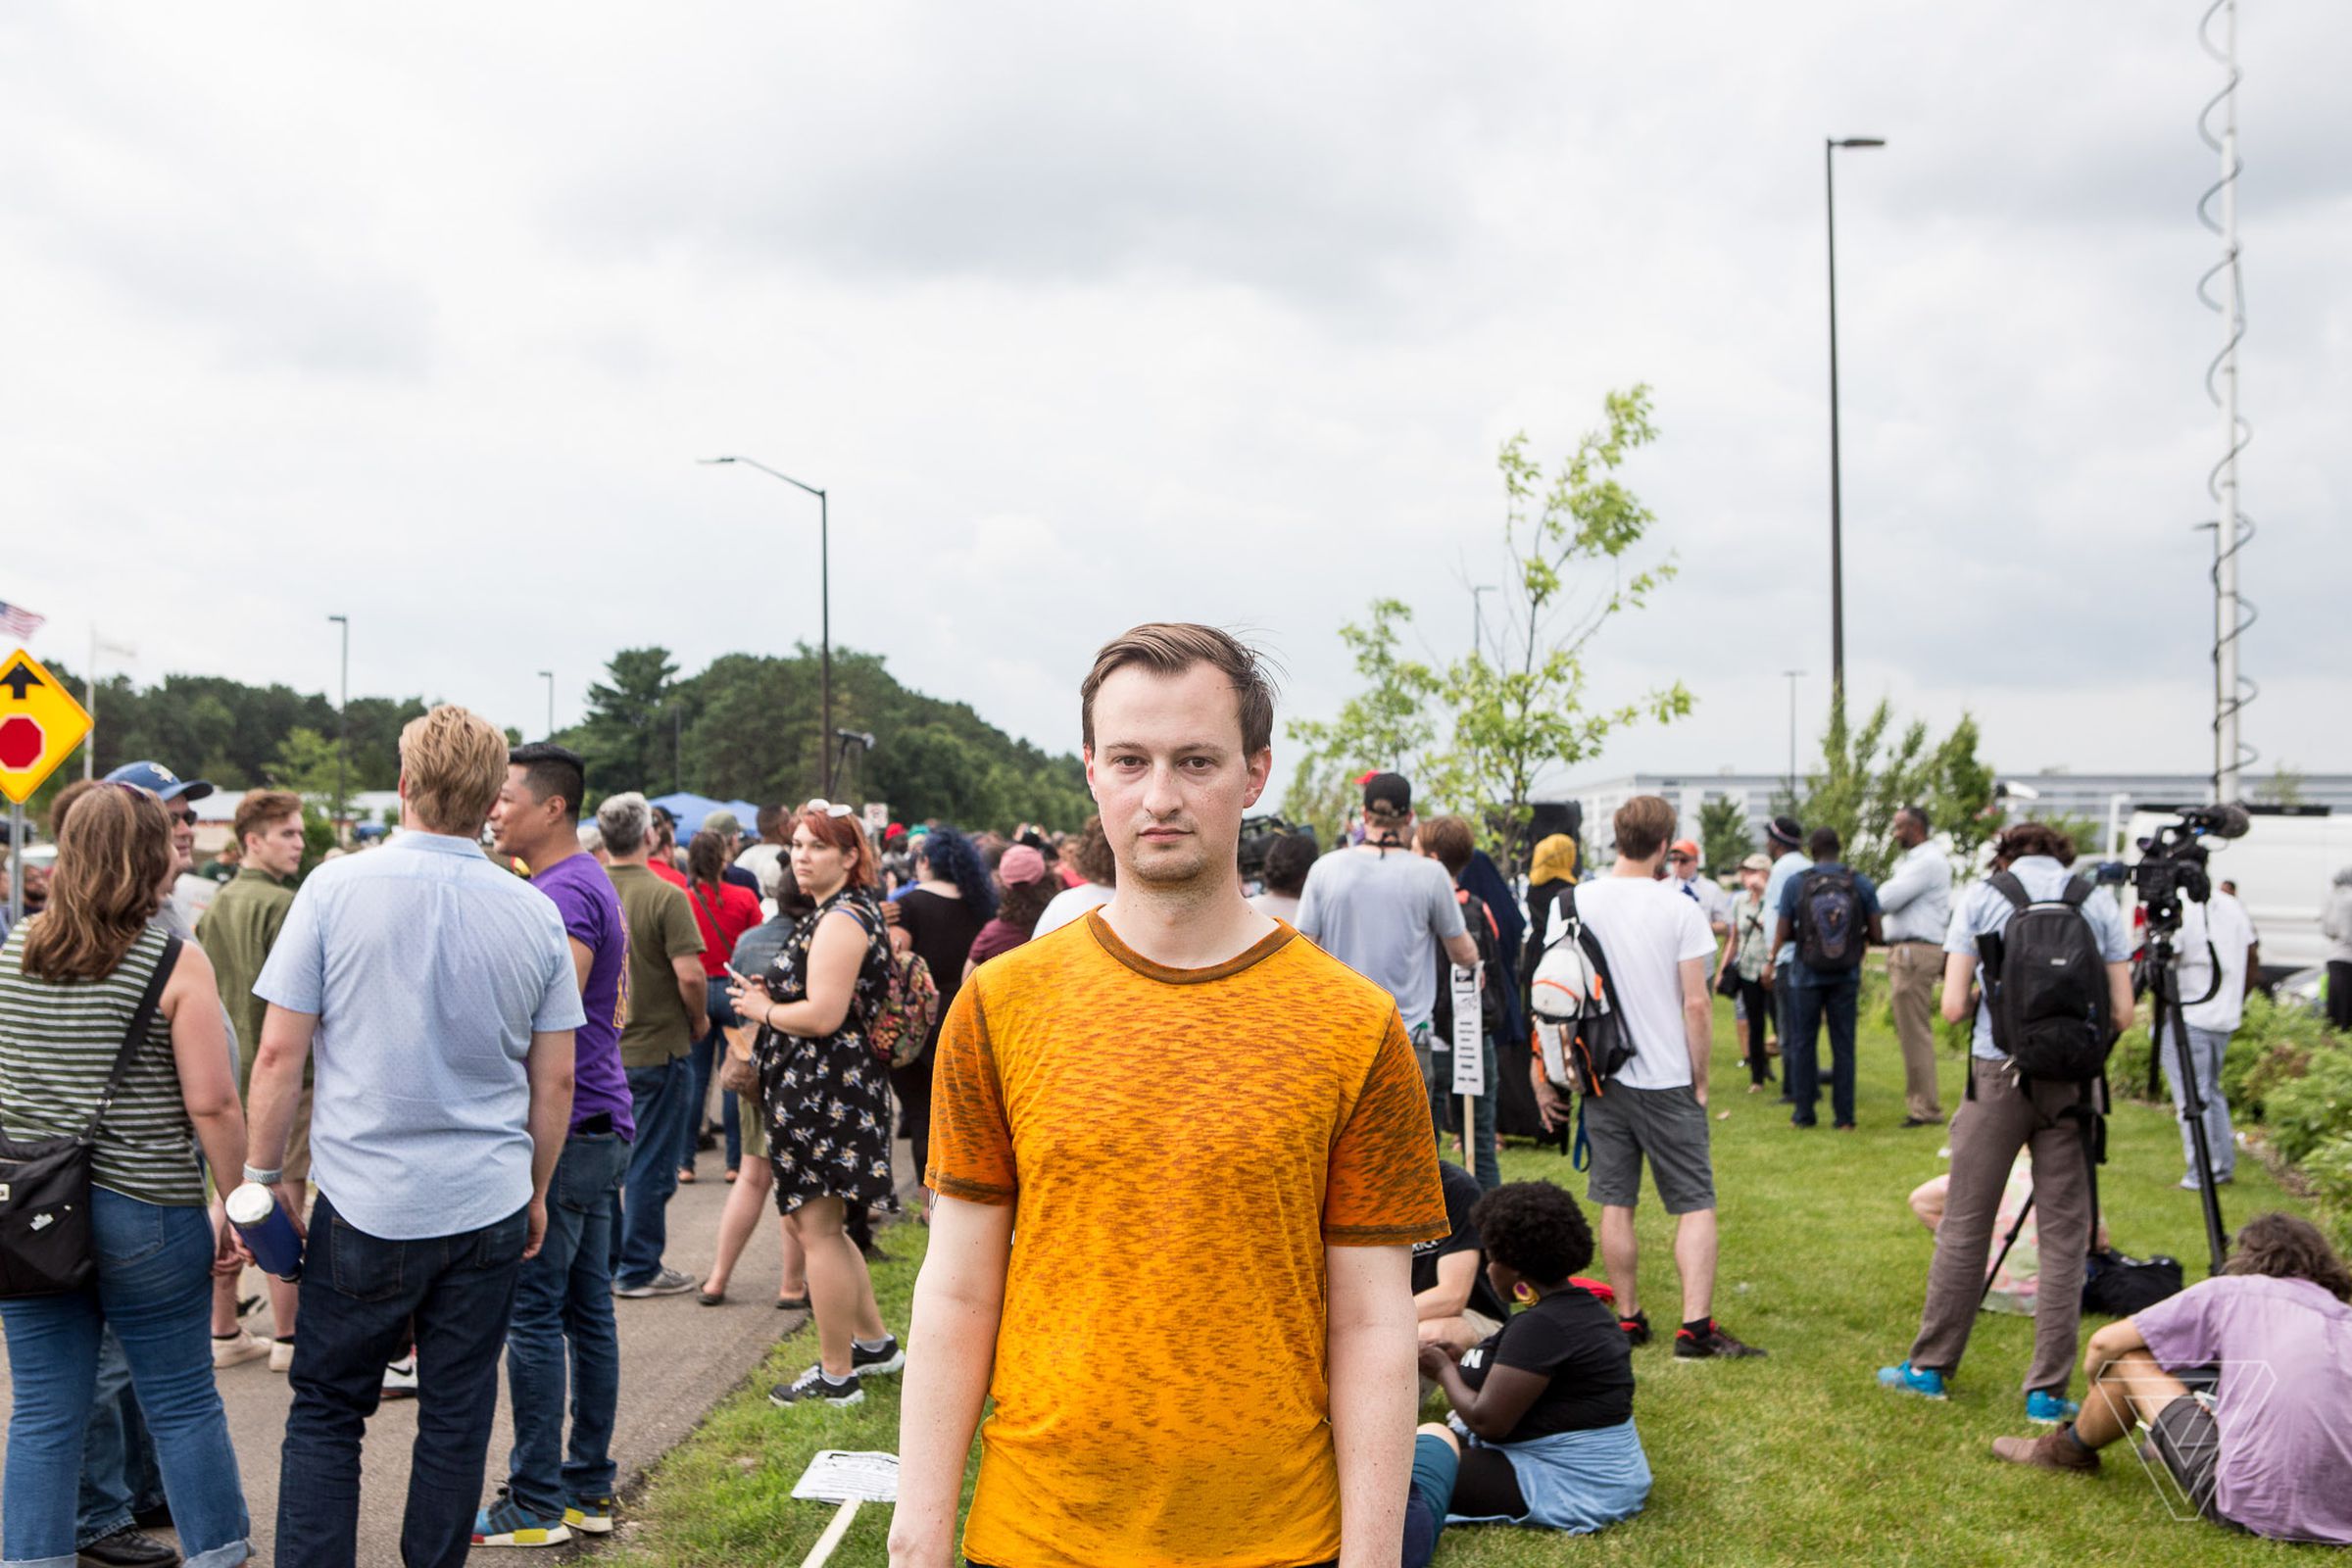 A portrait of Weston Fribley, a software engineer in Seattle, outside of the Amazon Fulfillment Center on Prime Day in Shakopee, Minn., on Monday, July 15th, 2019.